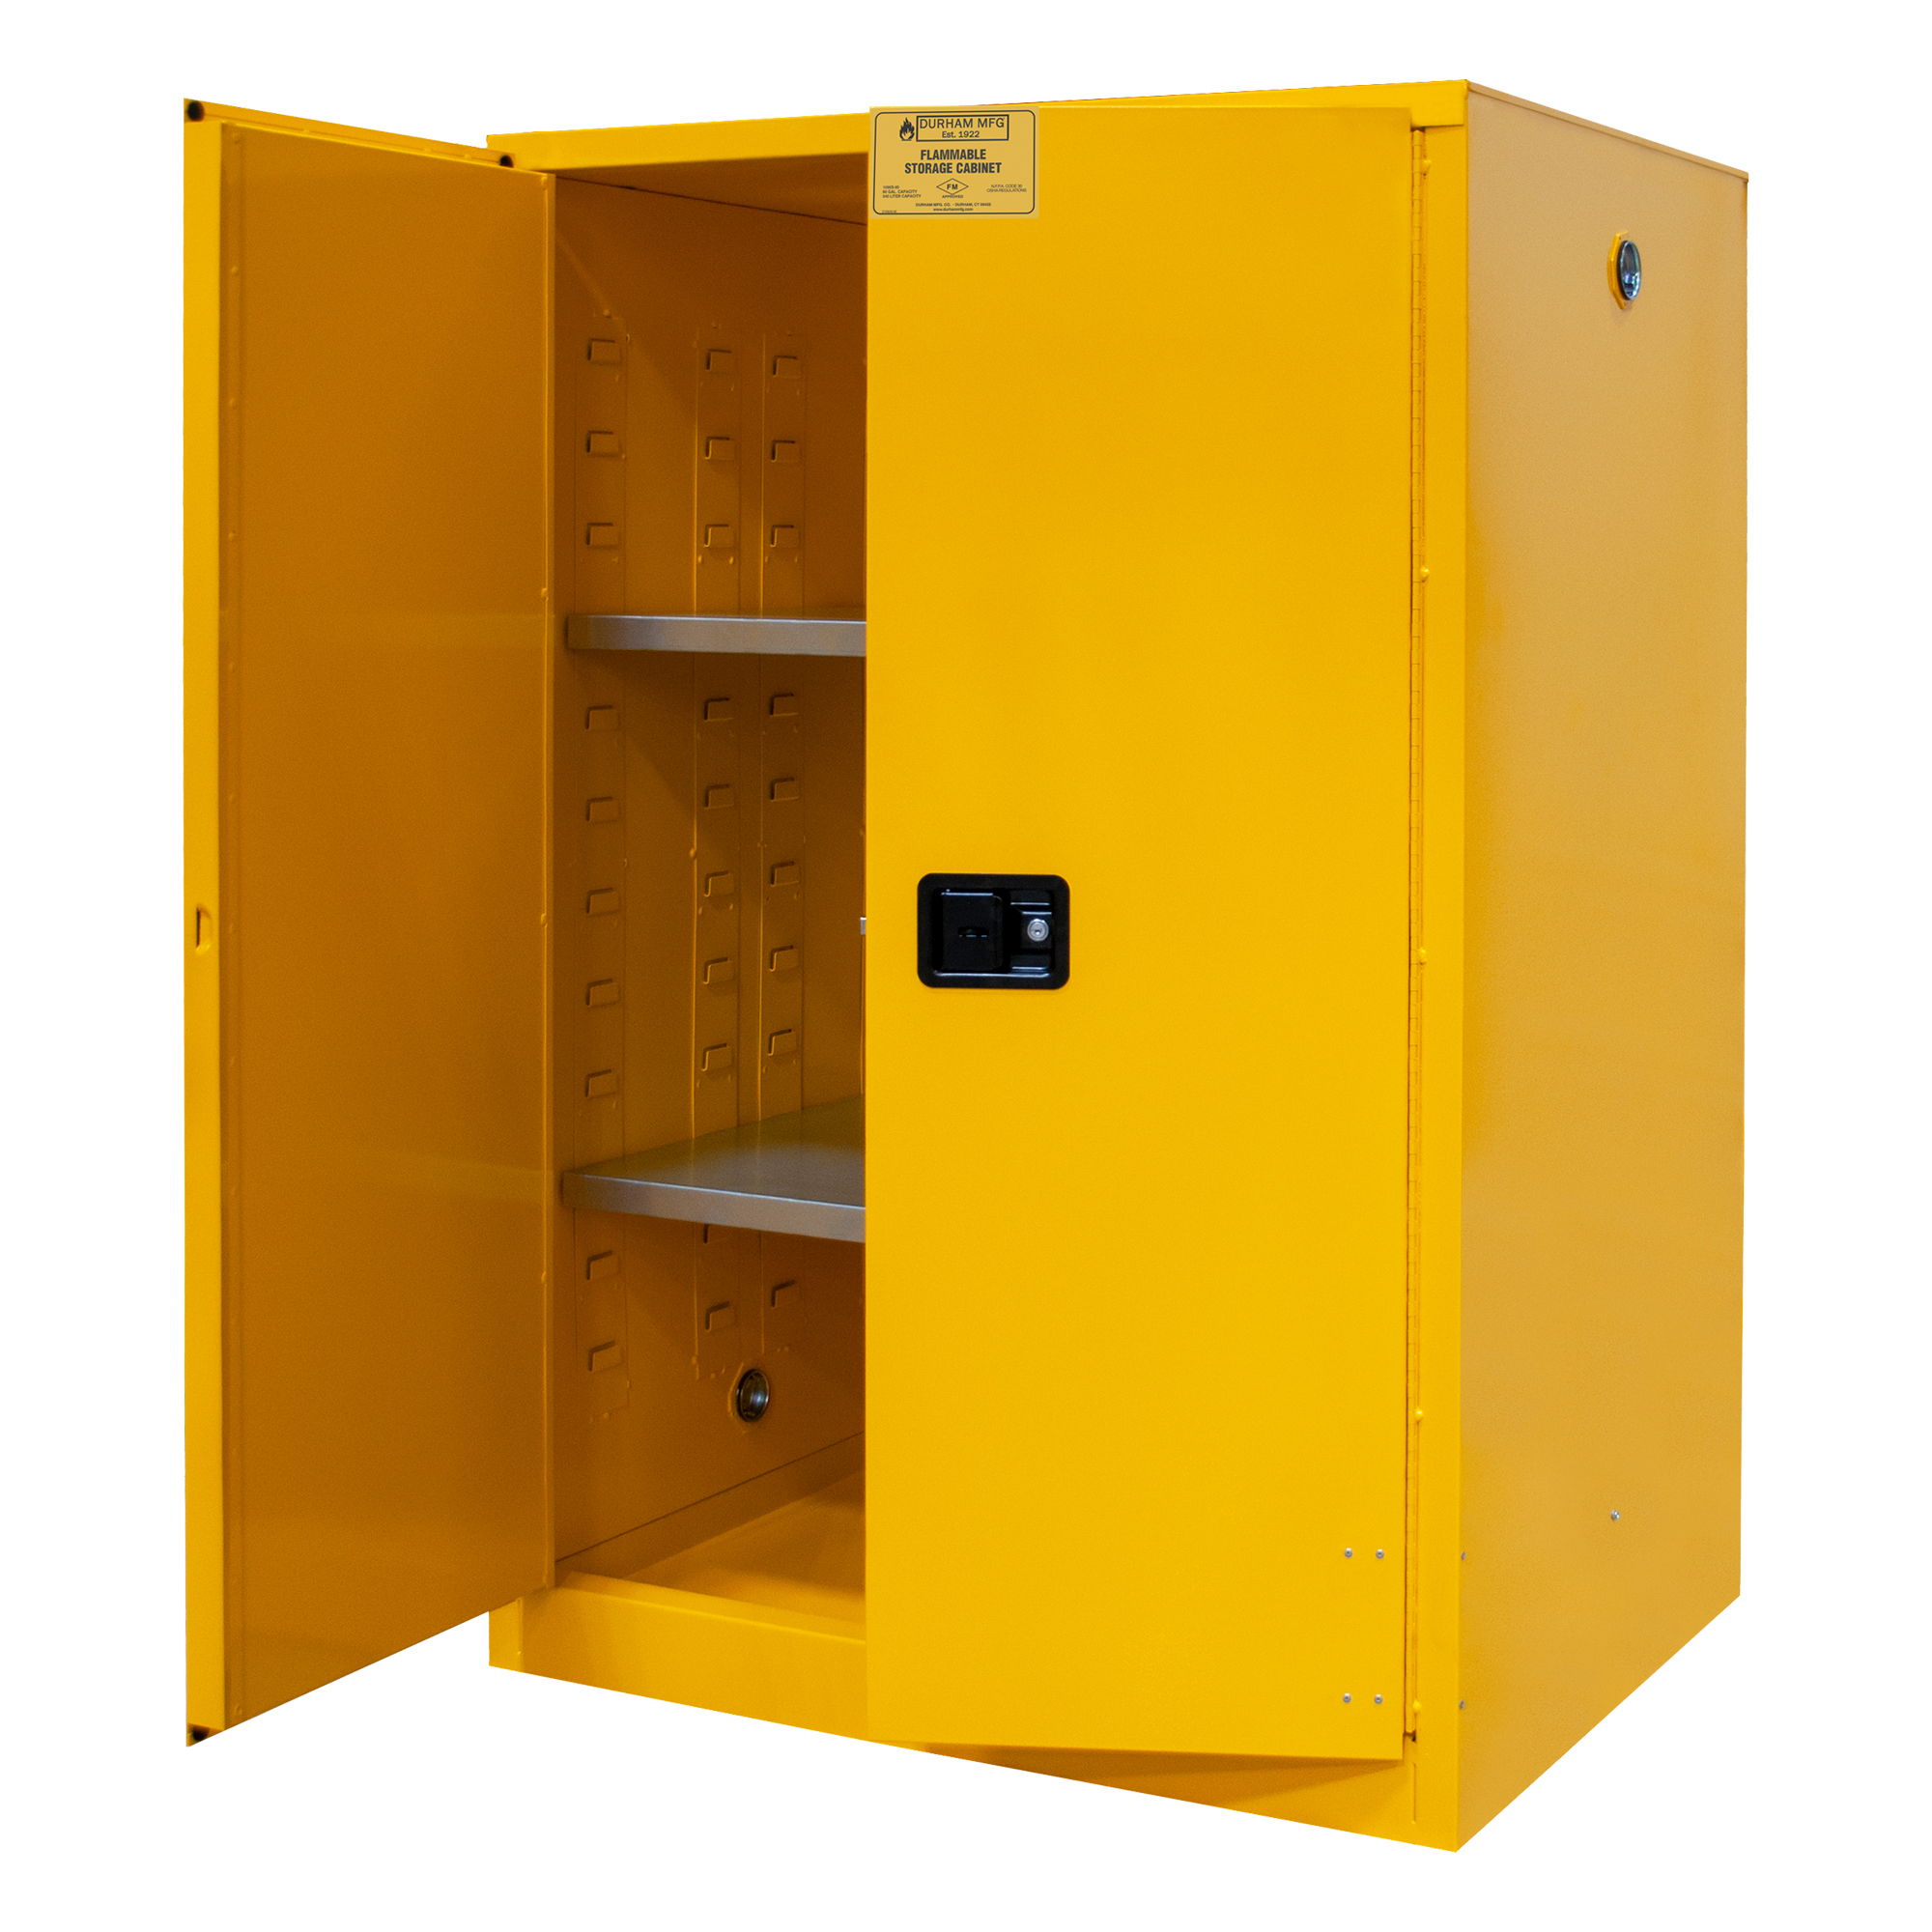 Yellow Powder Coat Finish Durham FM Approved 1060M-50 Welded 16 Gauge Steel Flammable Safety Manual Door Cabinet 2 Shelves 34 Length x 34 Width x 65 Height 60 gallons Capacity 